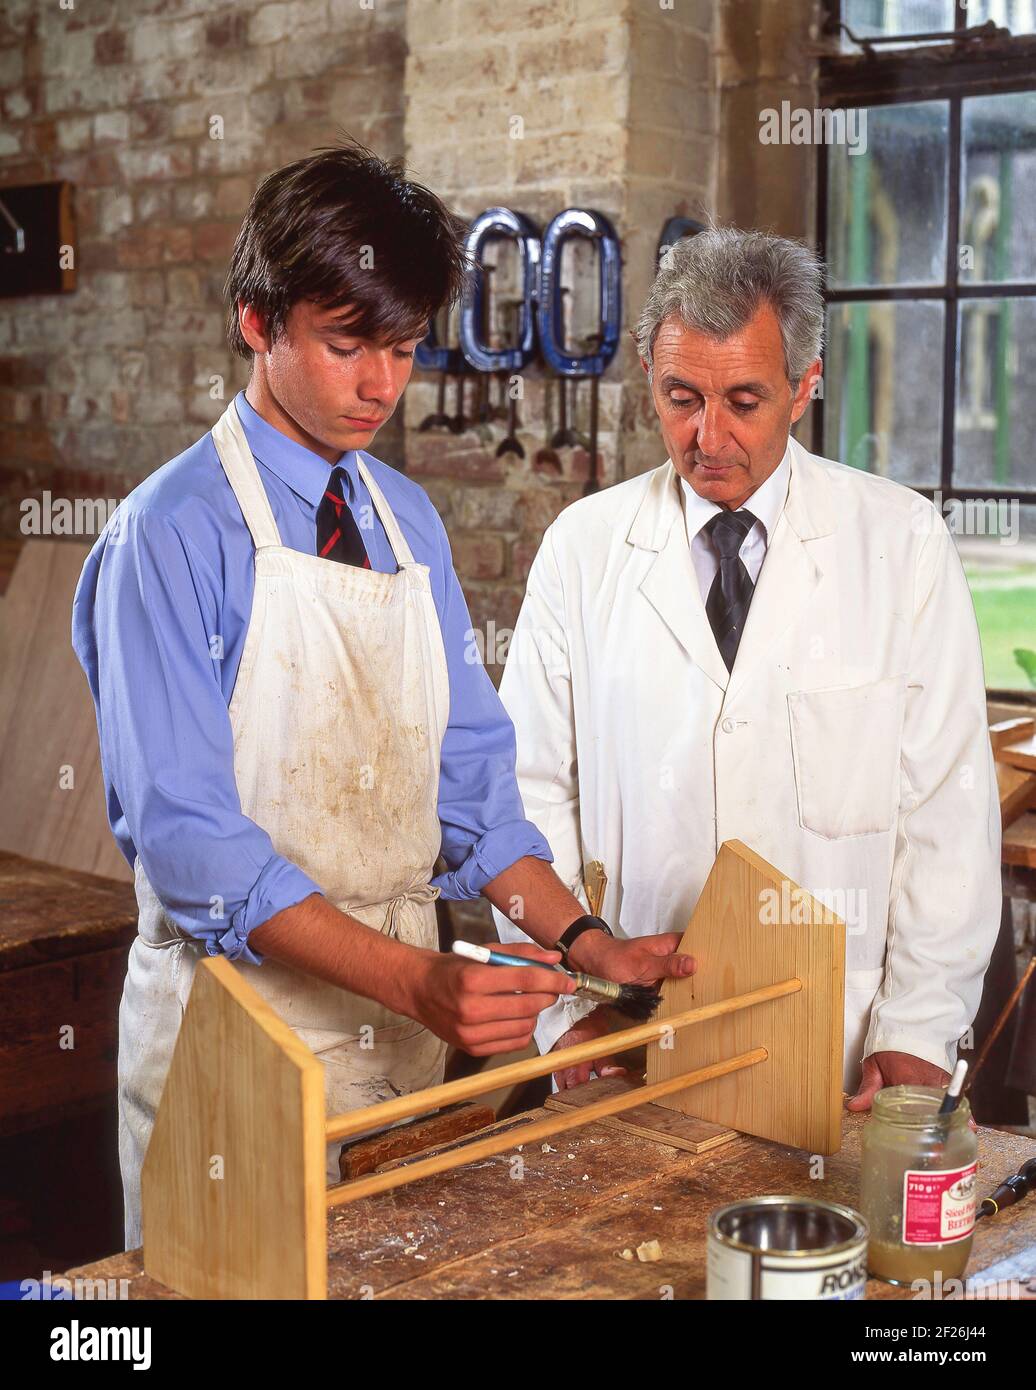 Teacher and male pupil in woodworking class, Surrey, England, United Kingdom Stock Photo